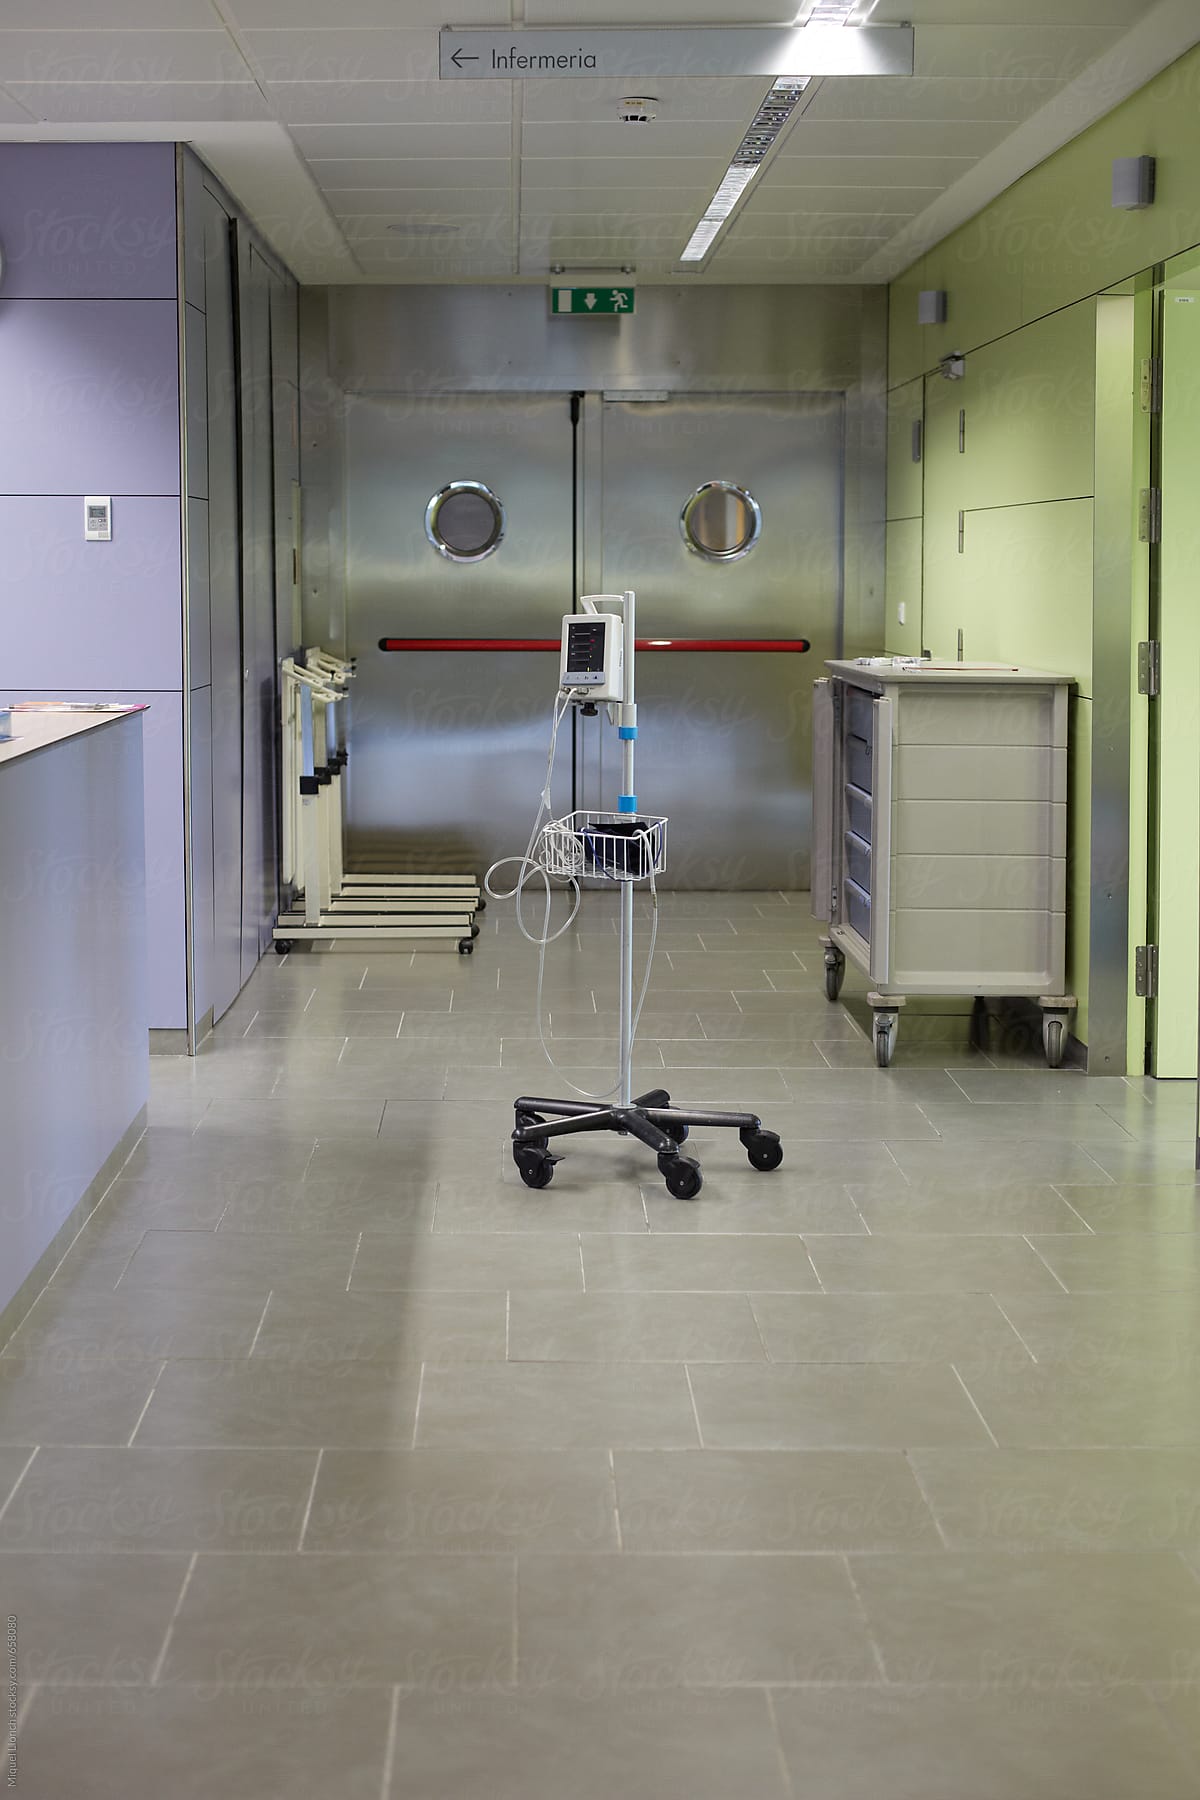 Electronic device for medical mesure in a hospital hall